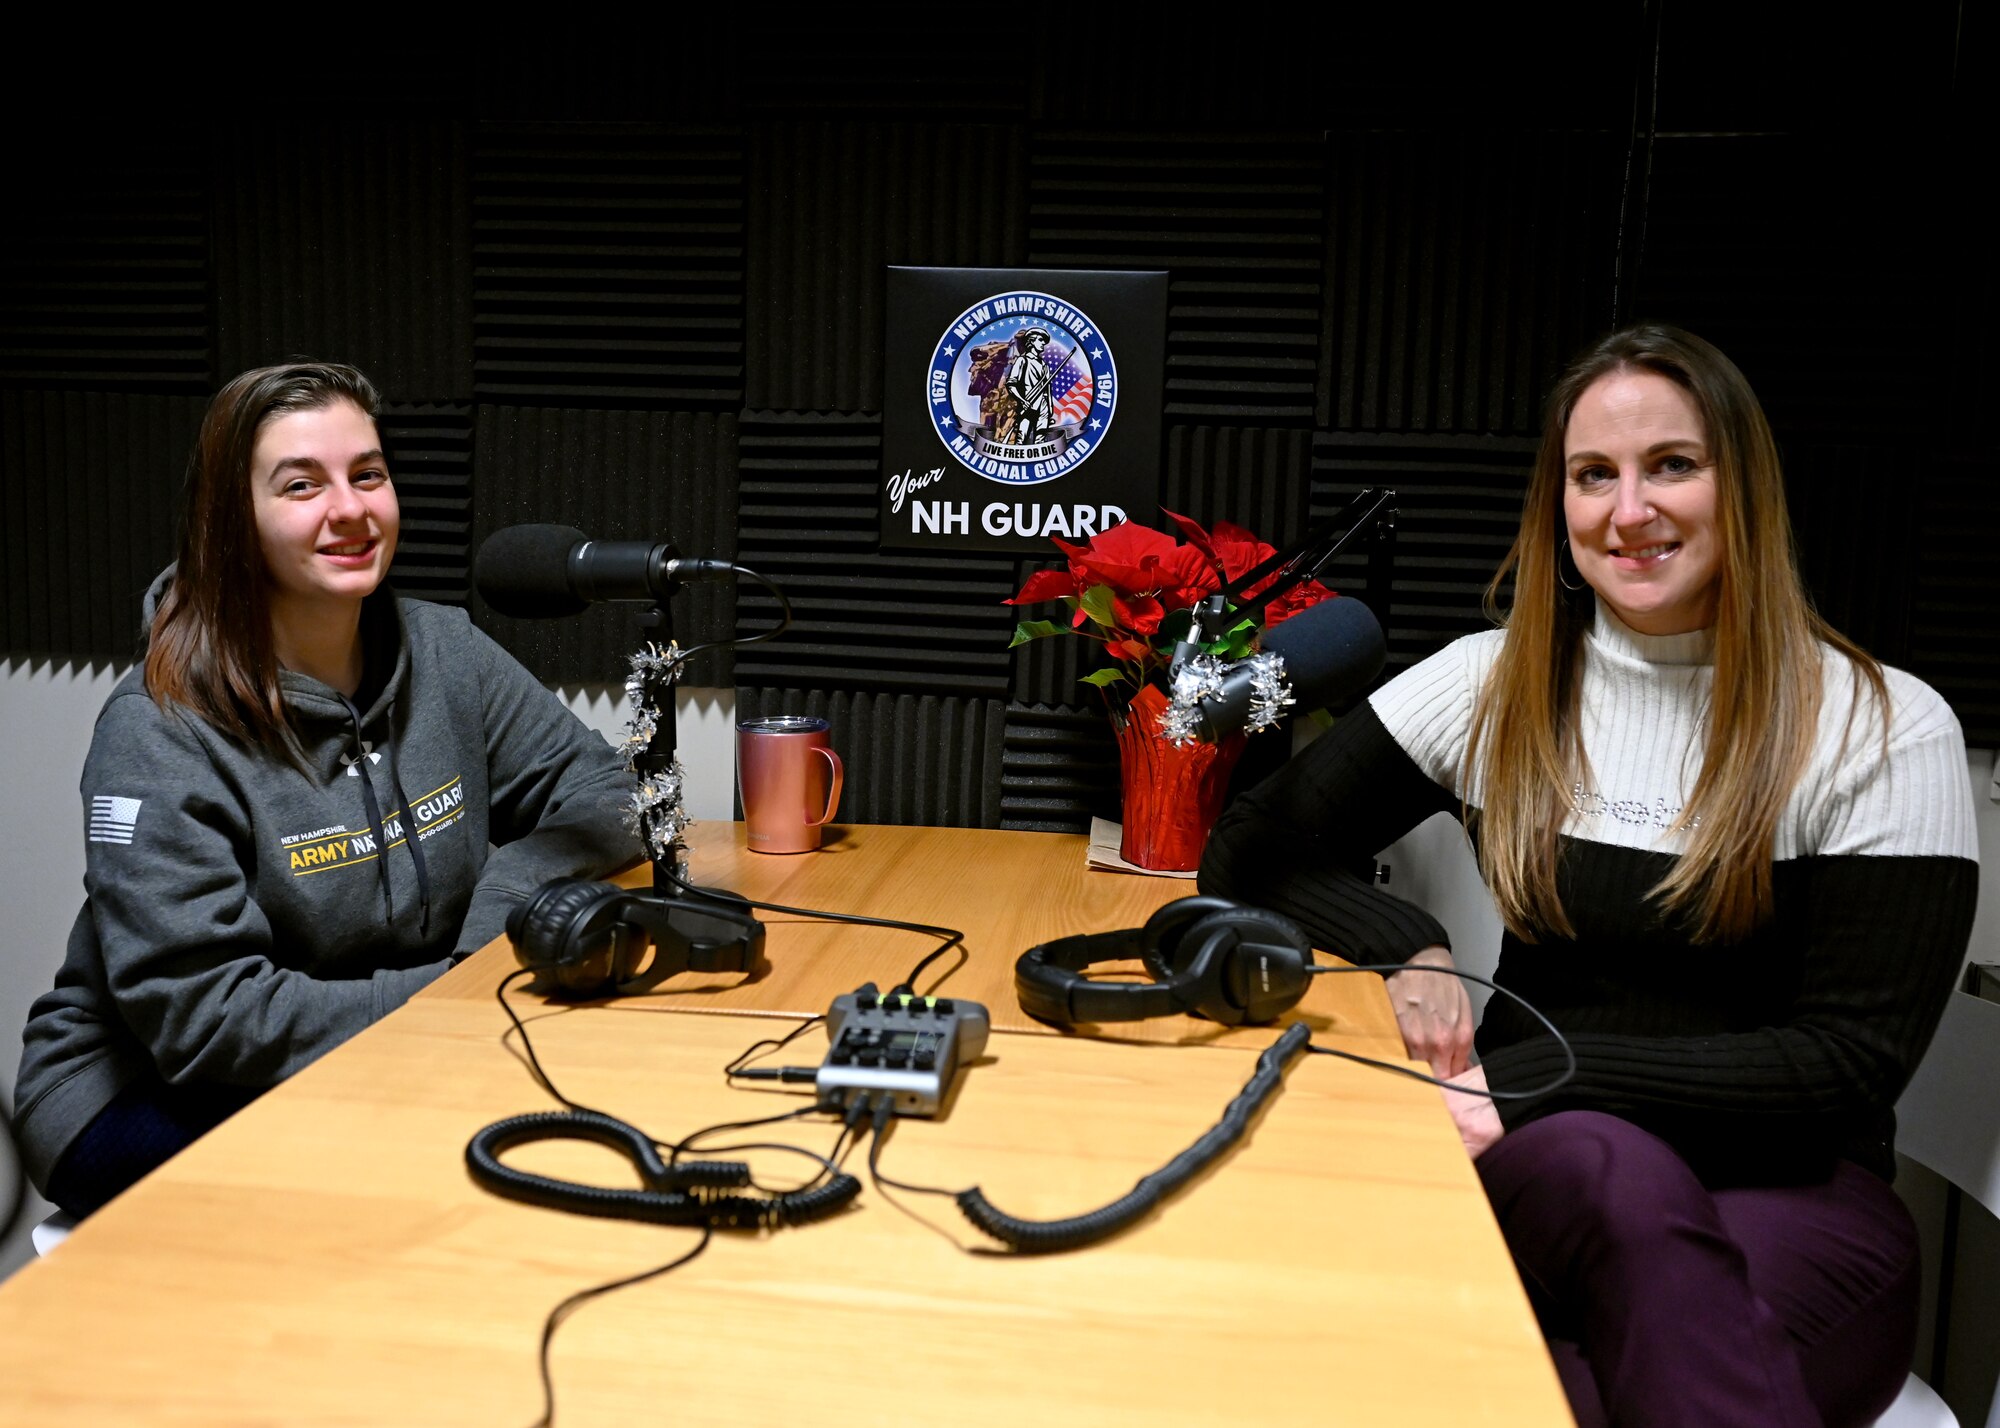 From left, Kiana Delviscovo and Heather Taylor of the NHARNG wellness division pose in the Your NH Guard podcast studio Dec. 14, 2021, in Concord, N.H.